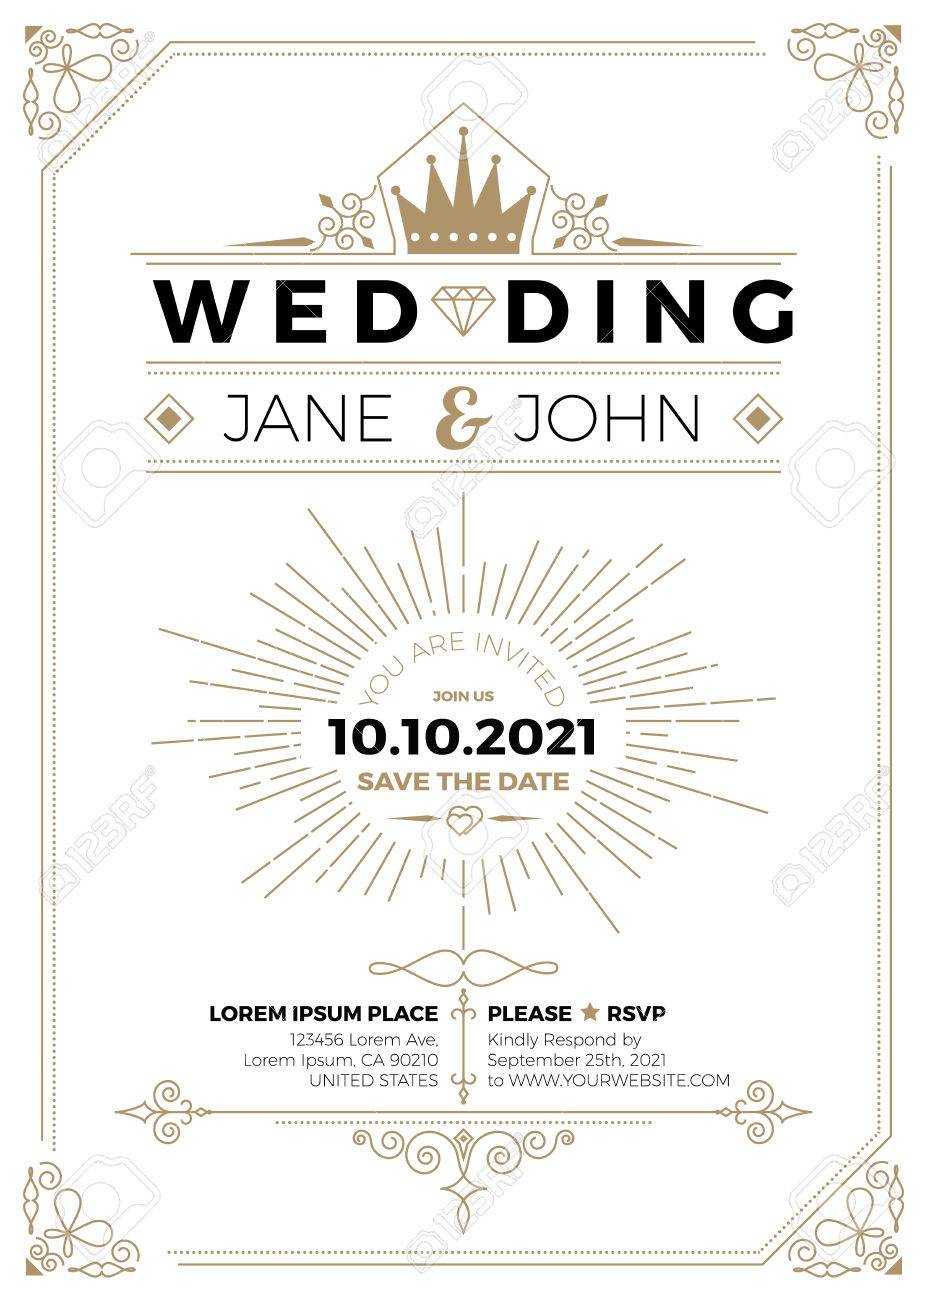 Vintage Wedding Invitation Card A5 Size Frame Layout Print Template With Wedding Card Size Template